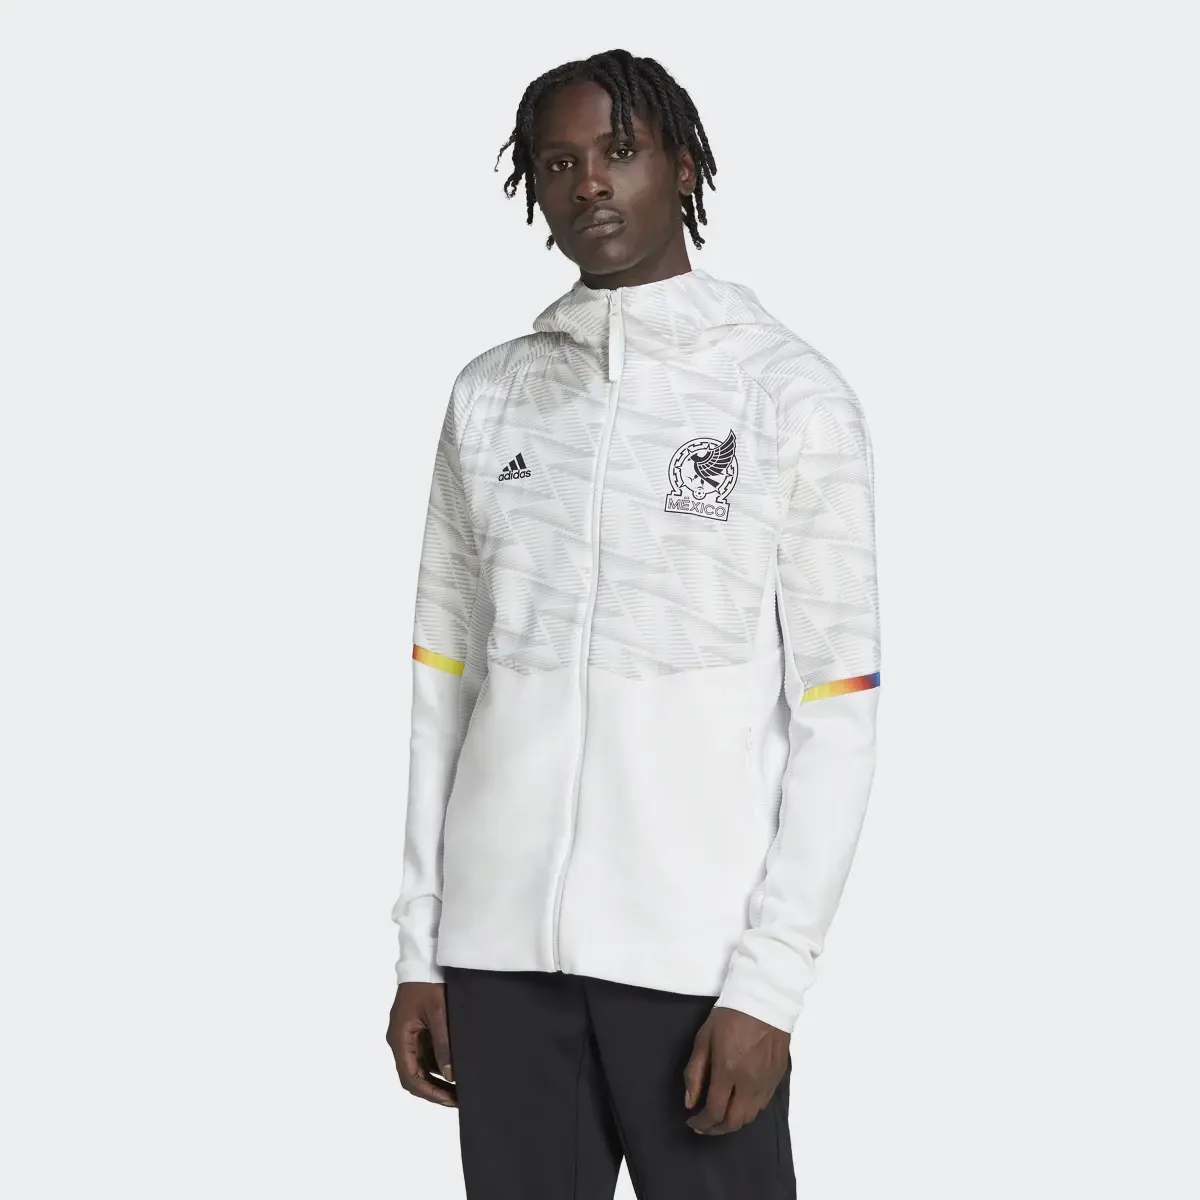 Adidas Mexico Game Day Full-Zip Travel Hoodie. 2